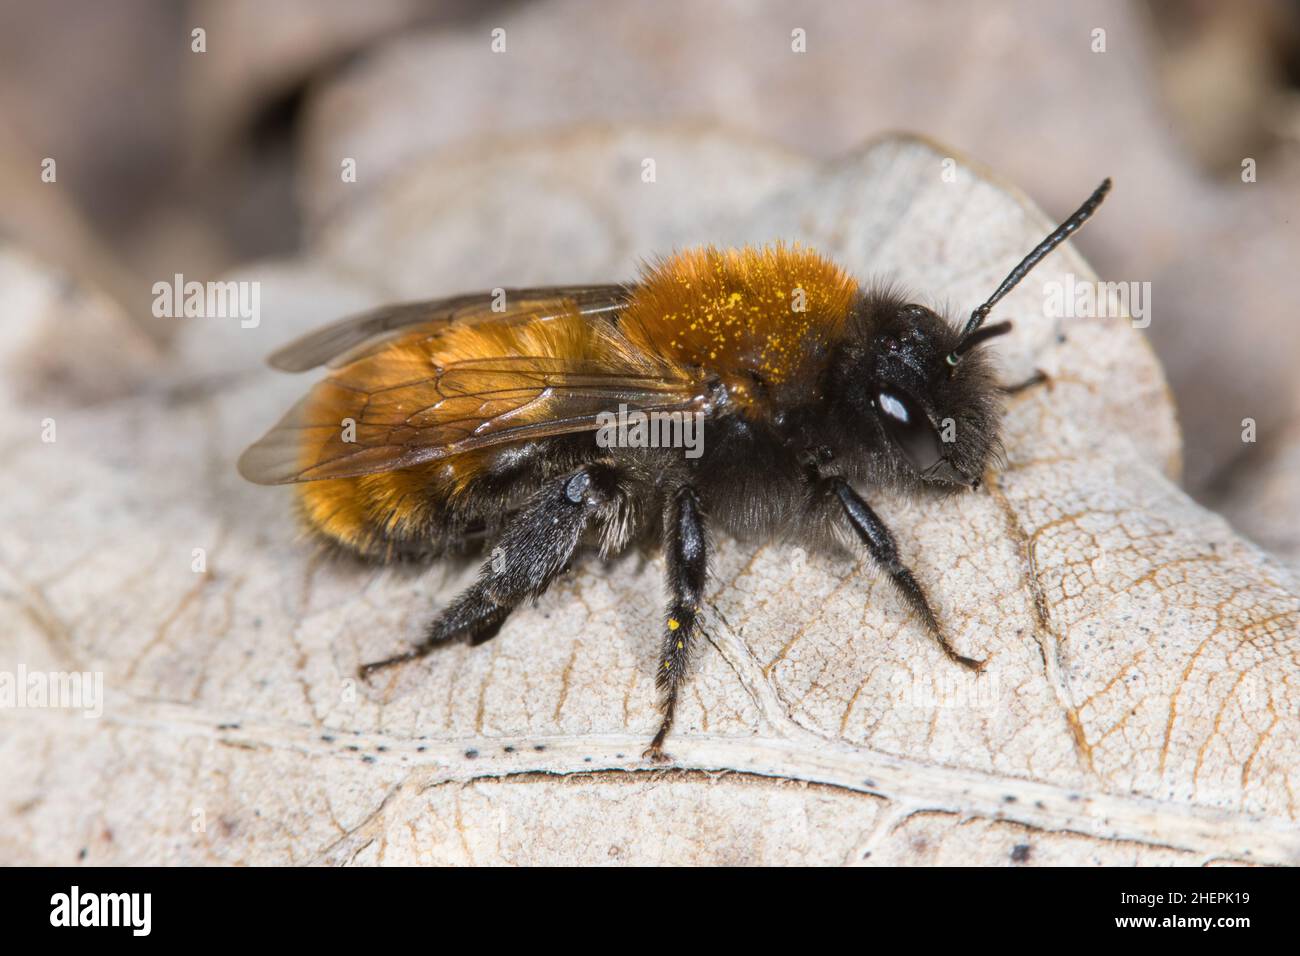 Tawny burrowing bee, Tawny mining bee, Tawny mining-bee (Andrena fulva, Andrena armata), Female on a withered leaf, Germany Stock Photo